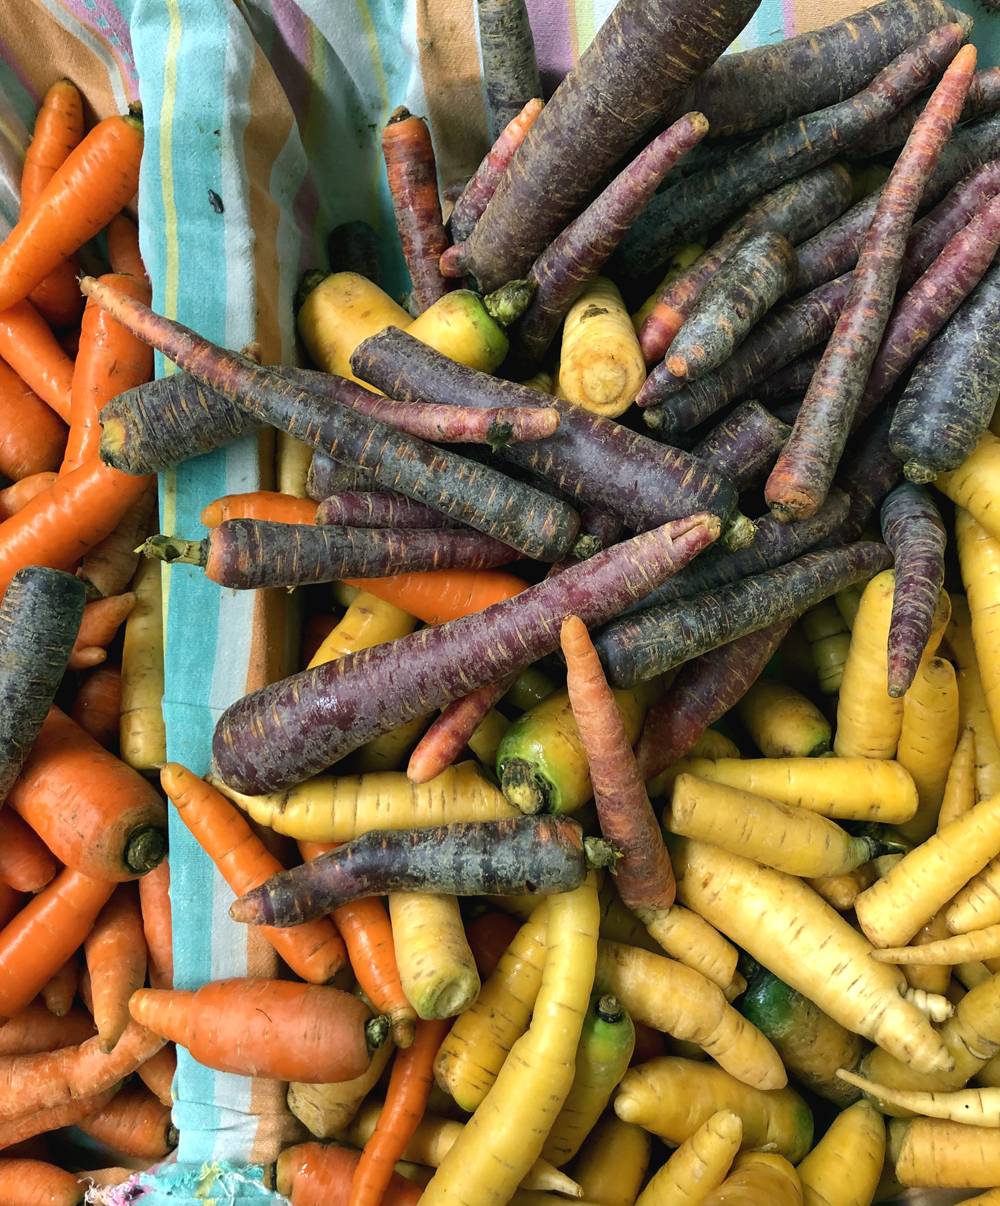 Orange, yellow, and purple carrots in two rectangular containers. The containers are lined with a blue, yellow, purple, and orange striped fabric. Photo by Jessica Hammie.